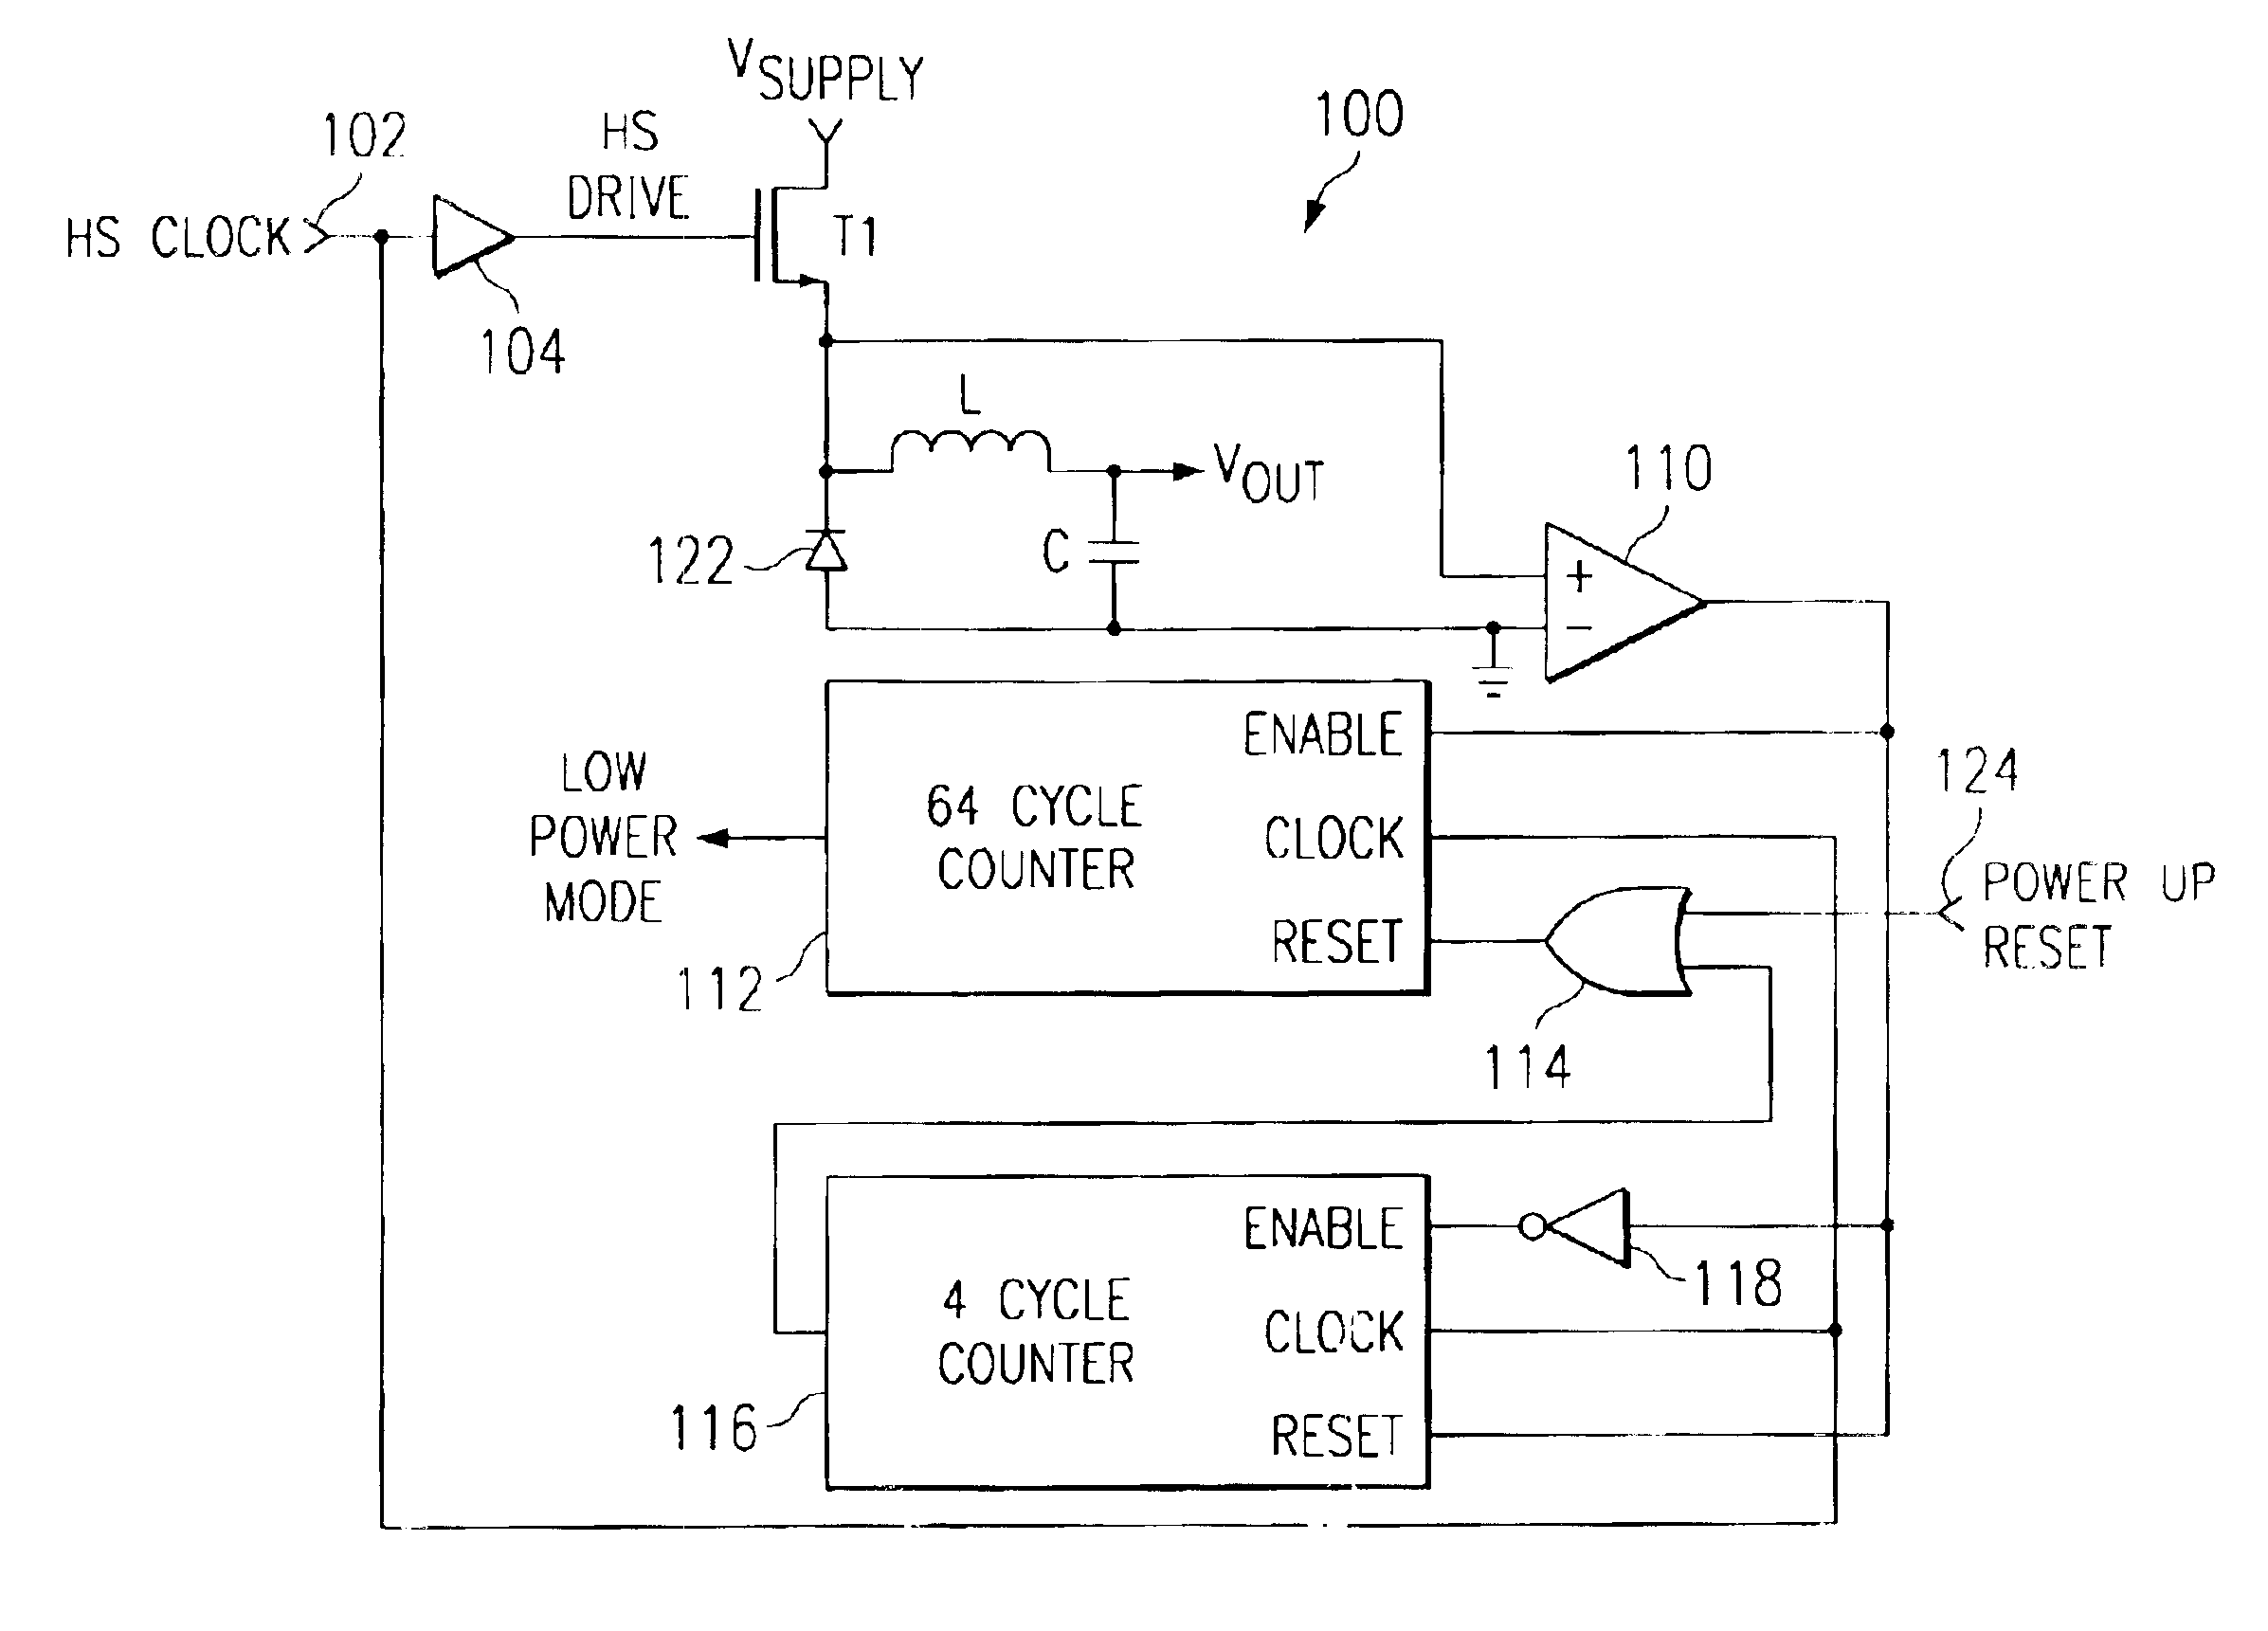 Low power mode detection circuit for a DC/DC converter